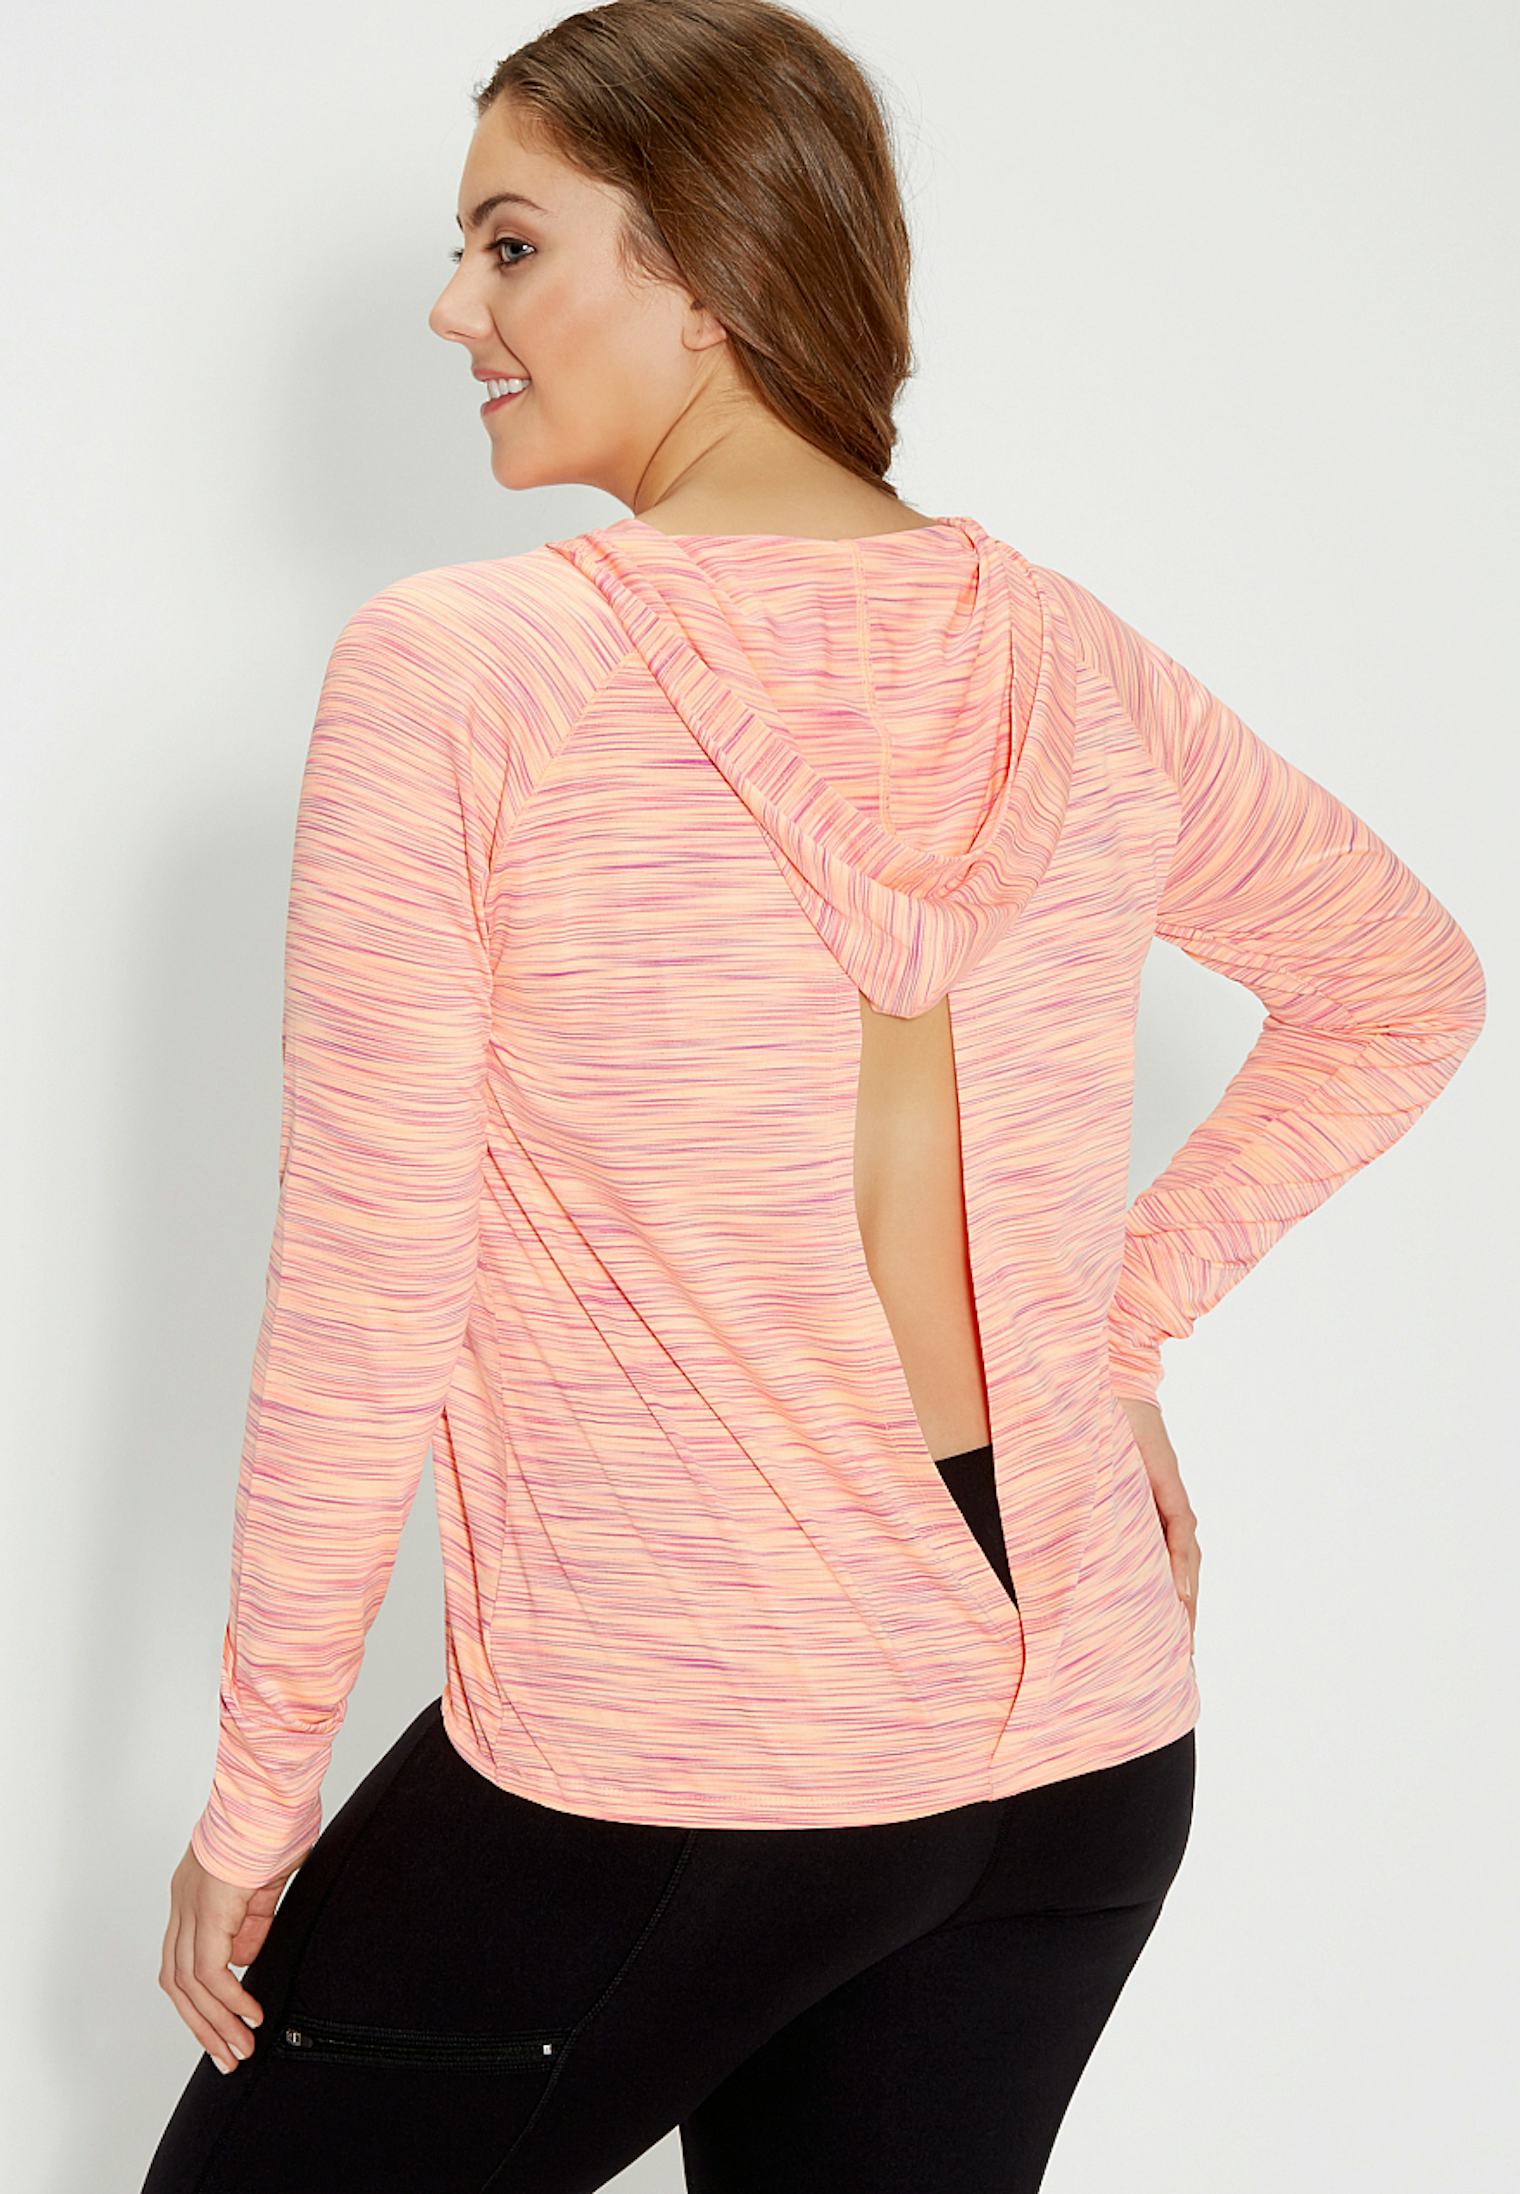 17 Cute Plus Size Workout Clothes To Feel Strong And Get Sweaty In 3356